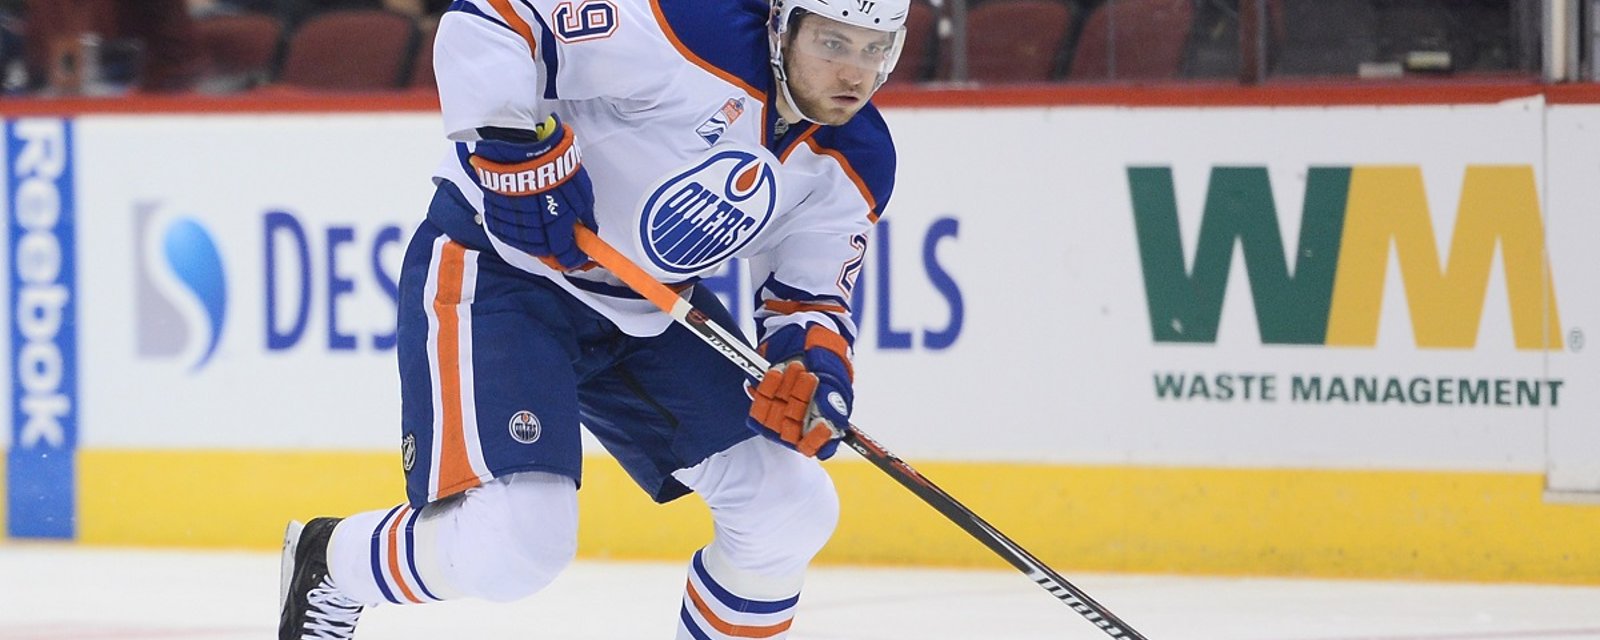 Don't look now but the Oilers have a leading scorer and his name is not McDavid.